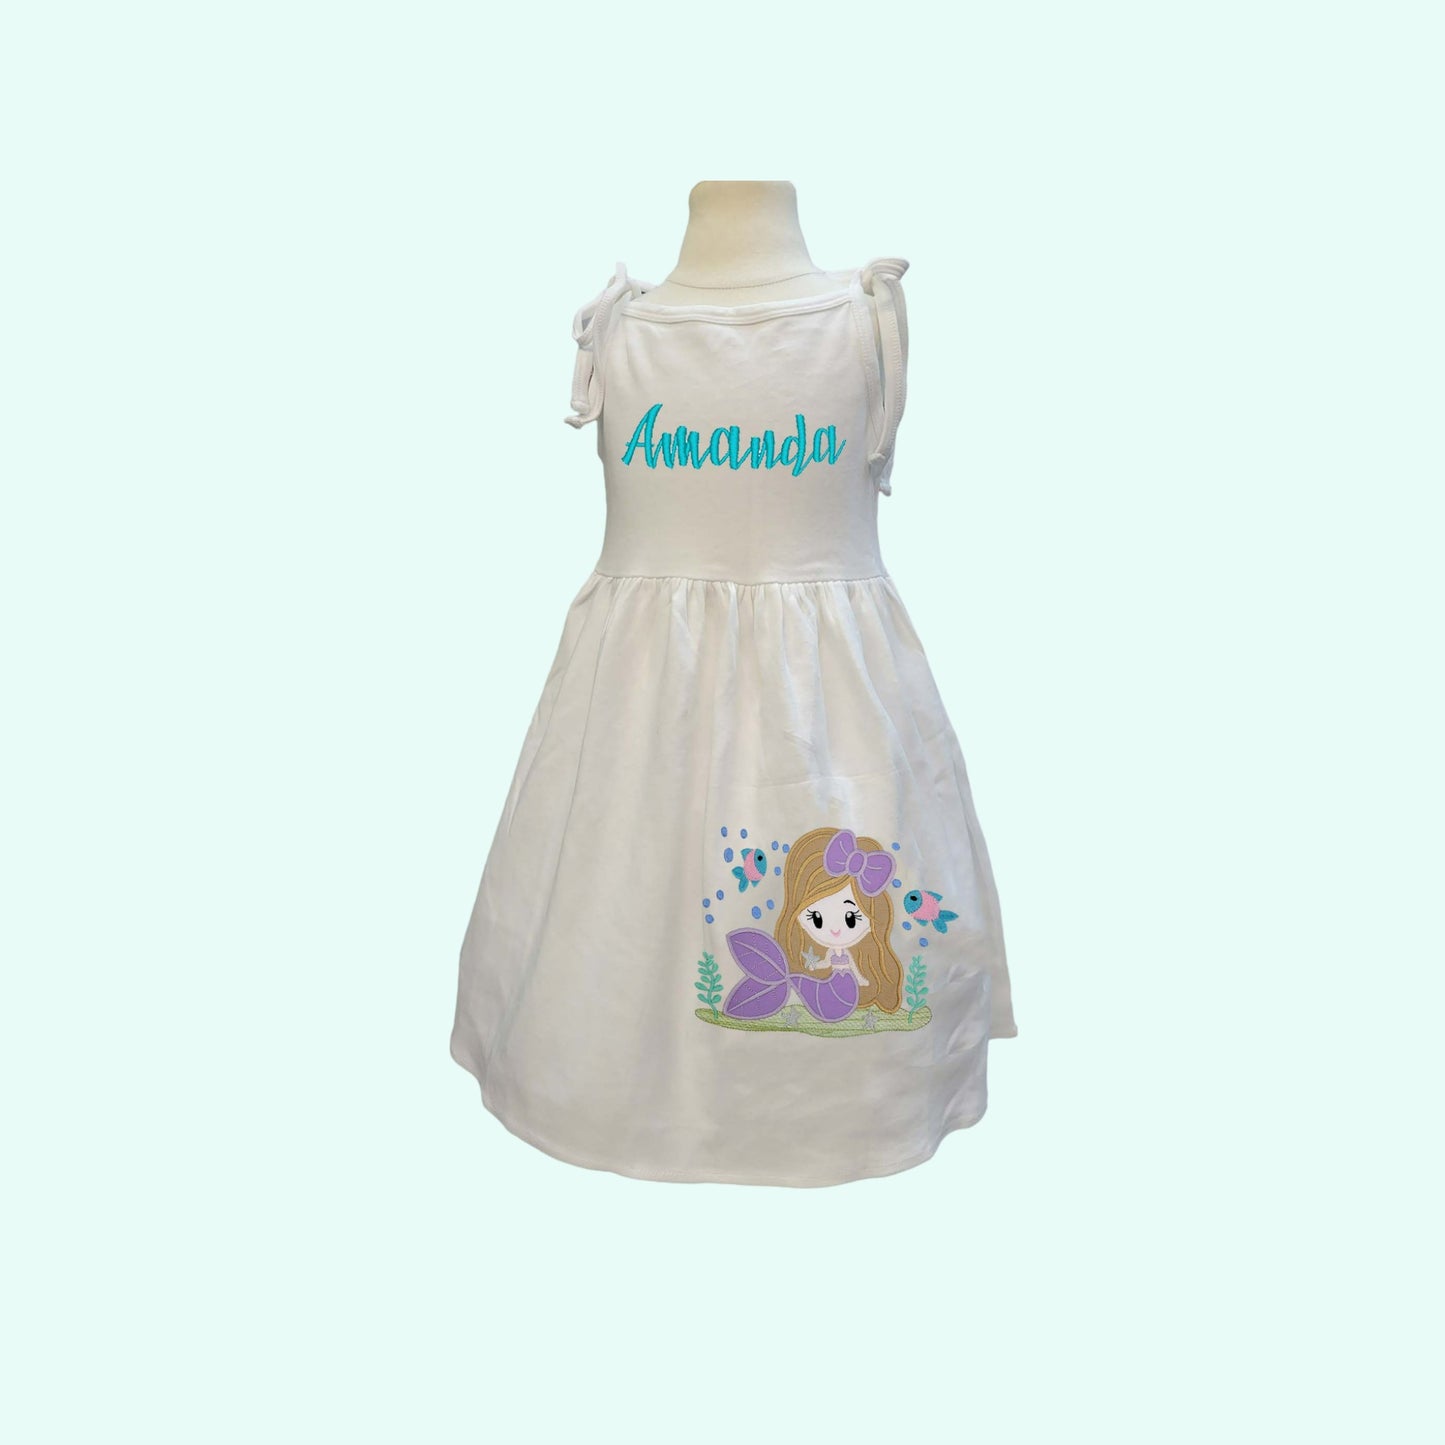 Mermaid Dress Girls Mermaid dress, Mermaid sundress,  Personalized Birthday outfit, Girl's Birthday outfit